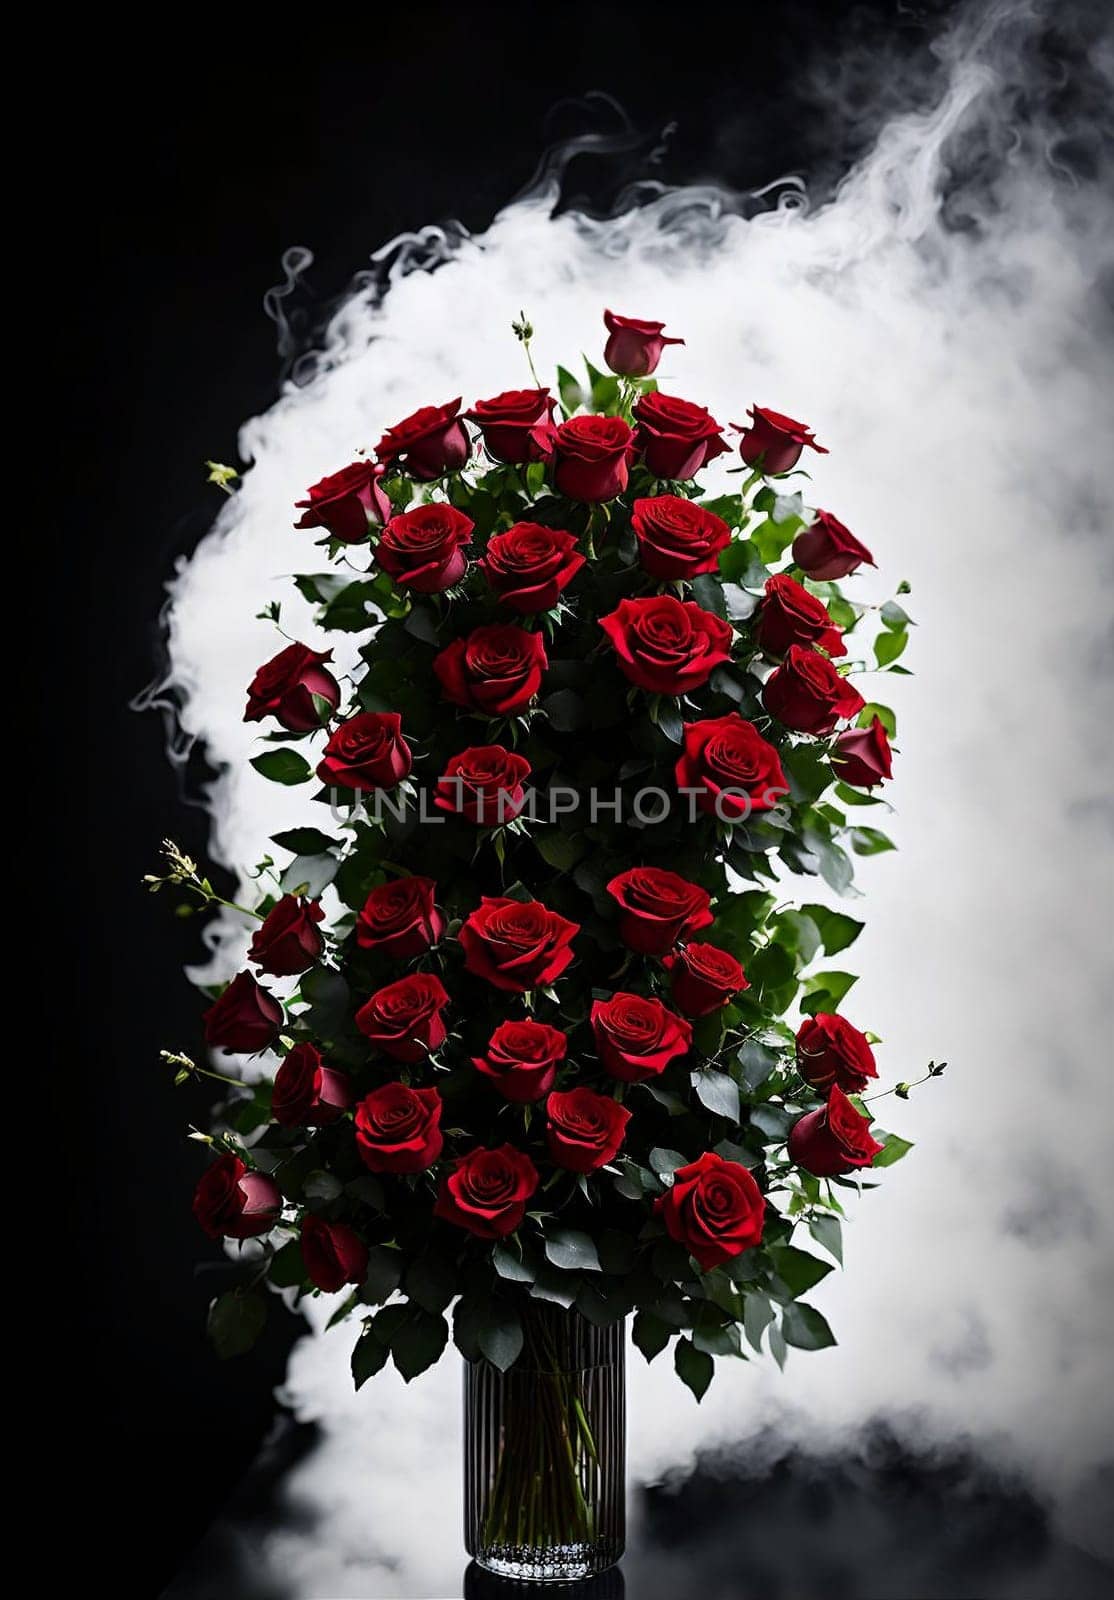 bouquet of red roses in a basket on a light background. by Rawlik